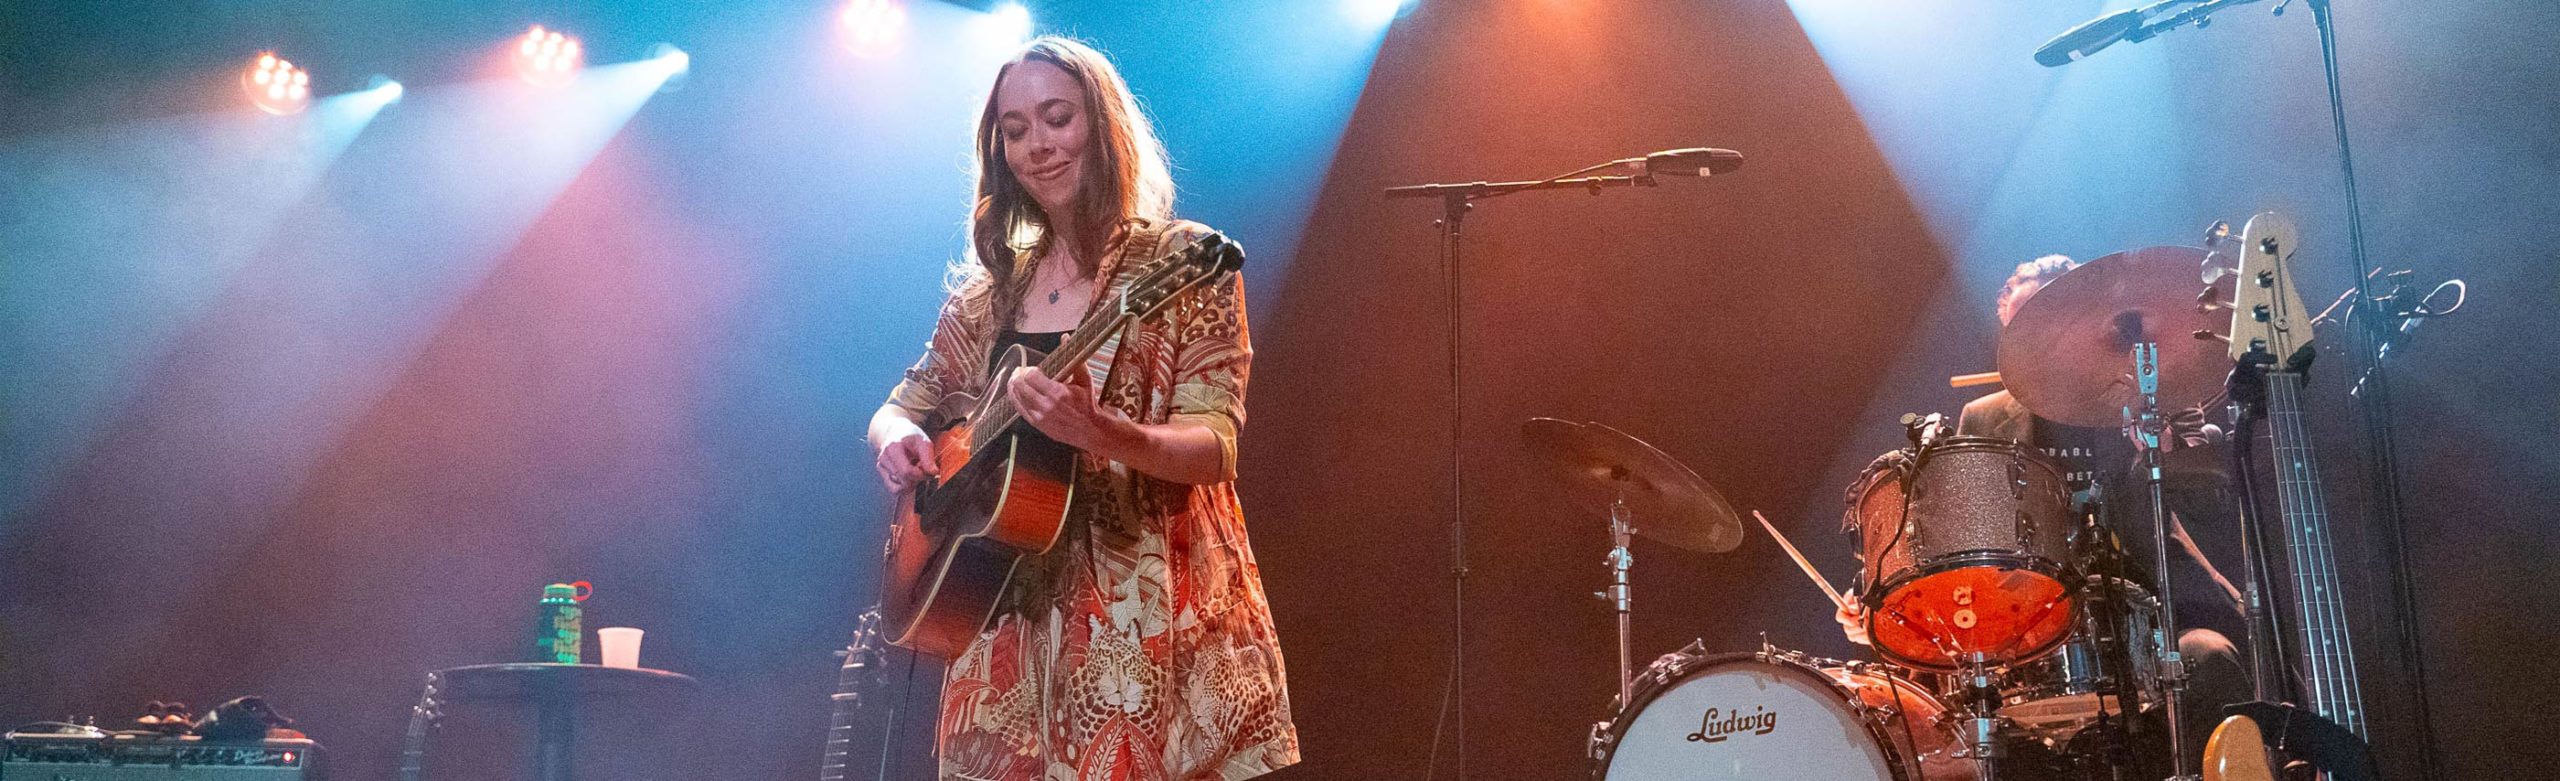 Sarah Jarosz Will Return to Montana for Two Concerts in 2022 Image